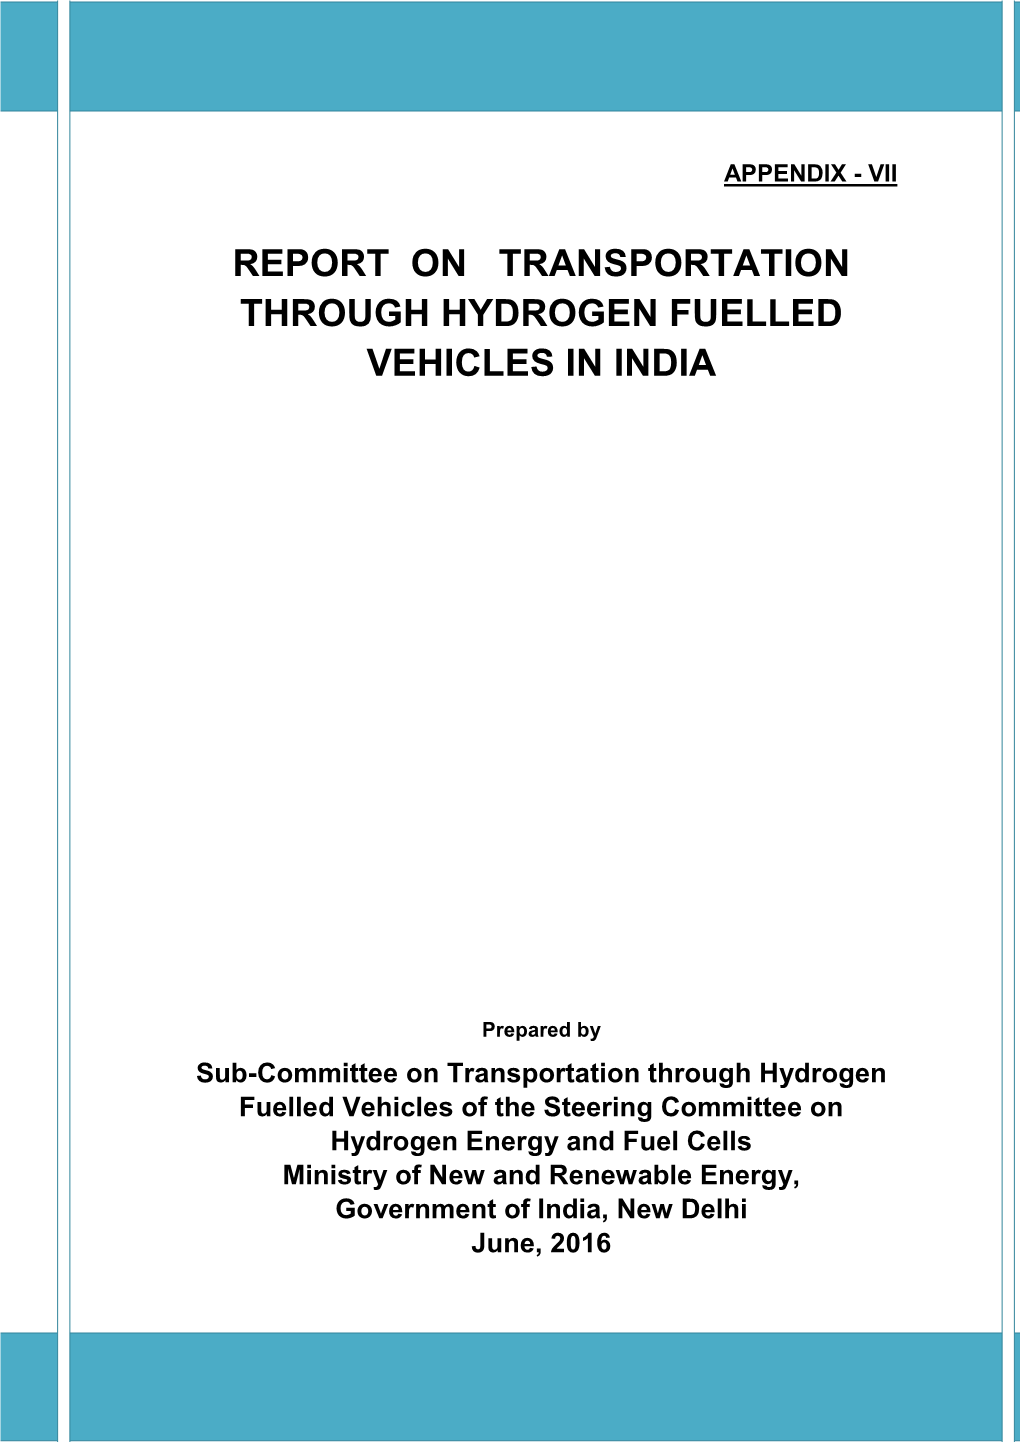 Transportation Through Hydrogen Fuelled Vehicles in India